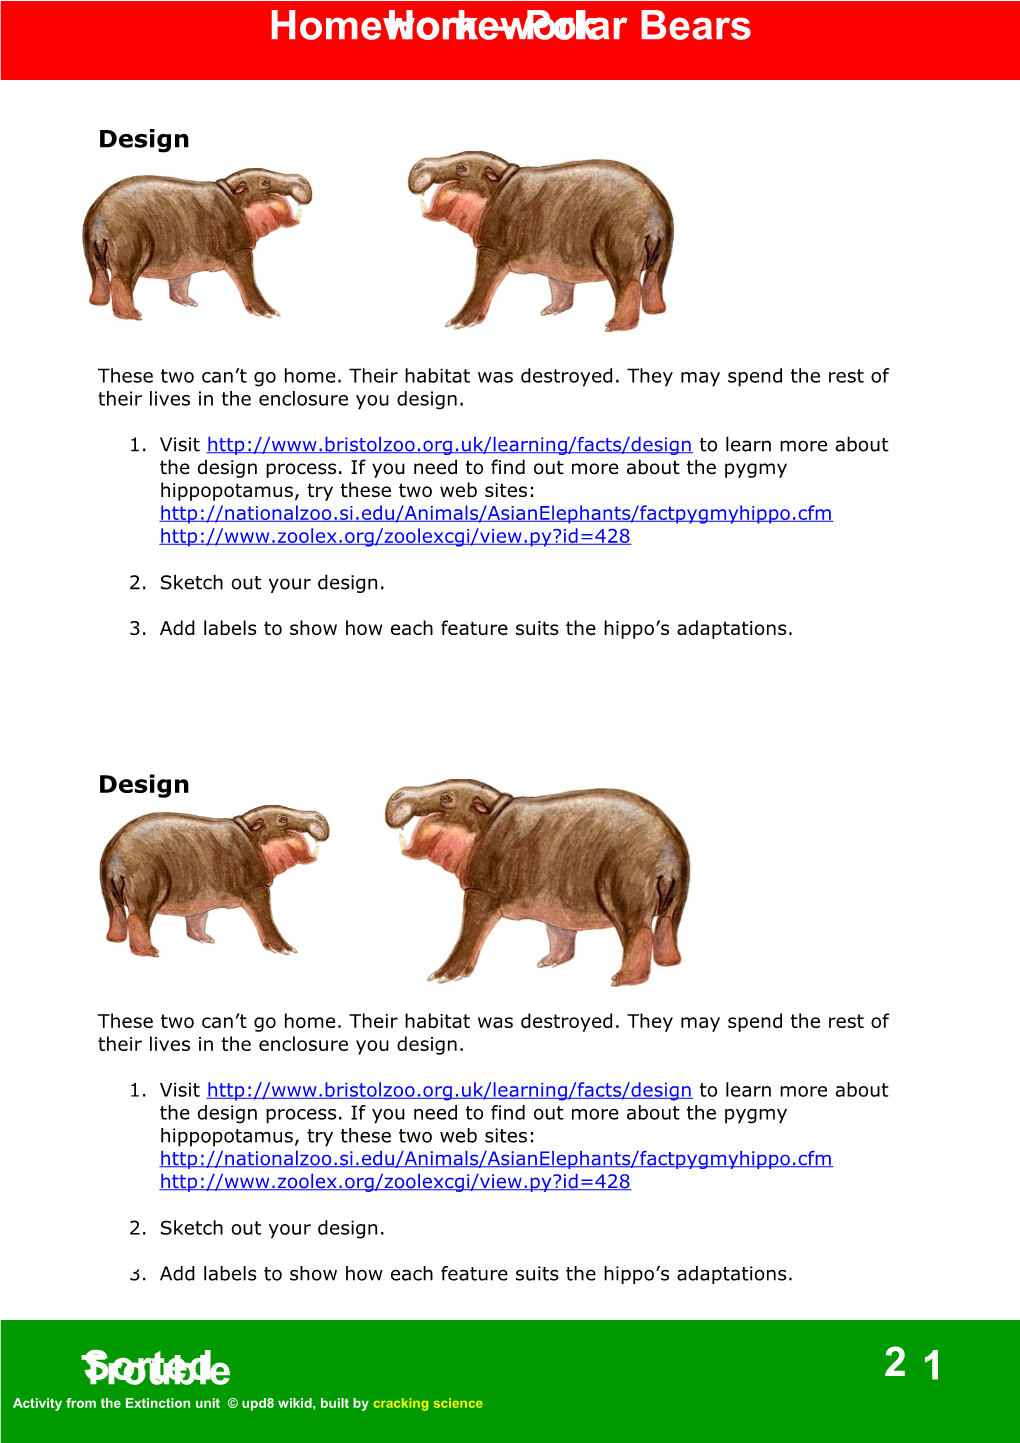 3. Add Labels to Show How Each Feature Suits the Hippo S Adaptations